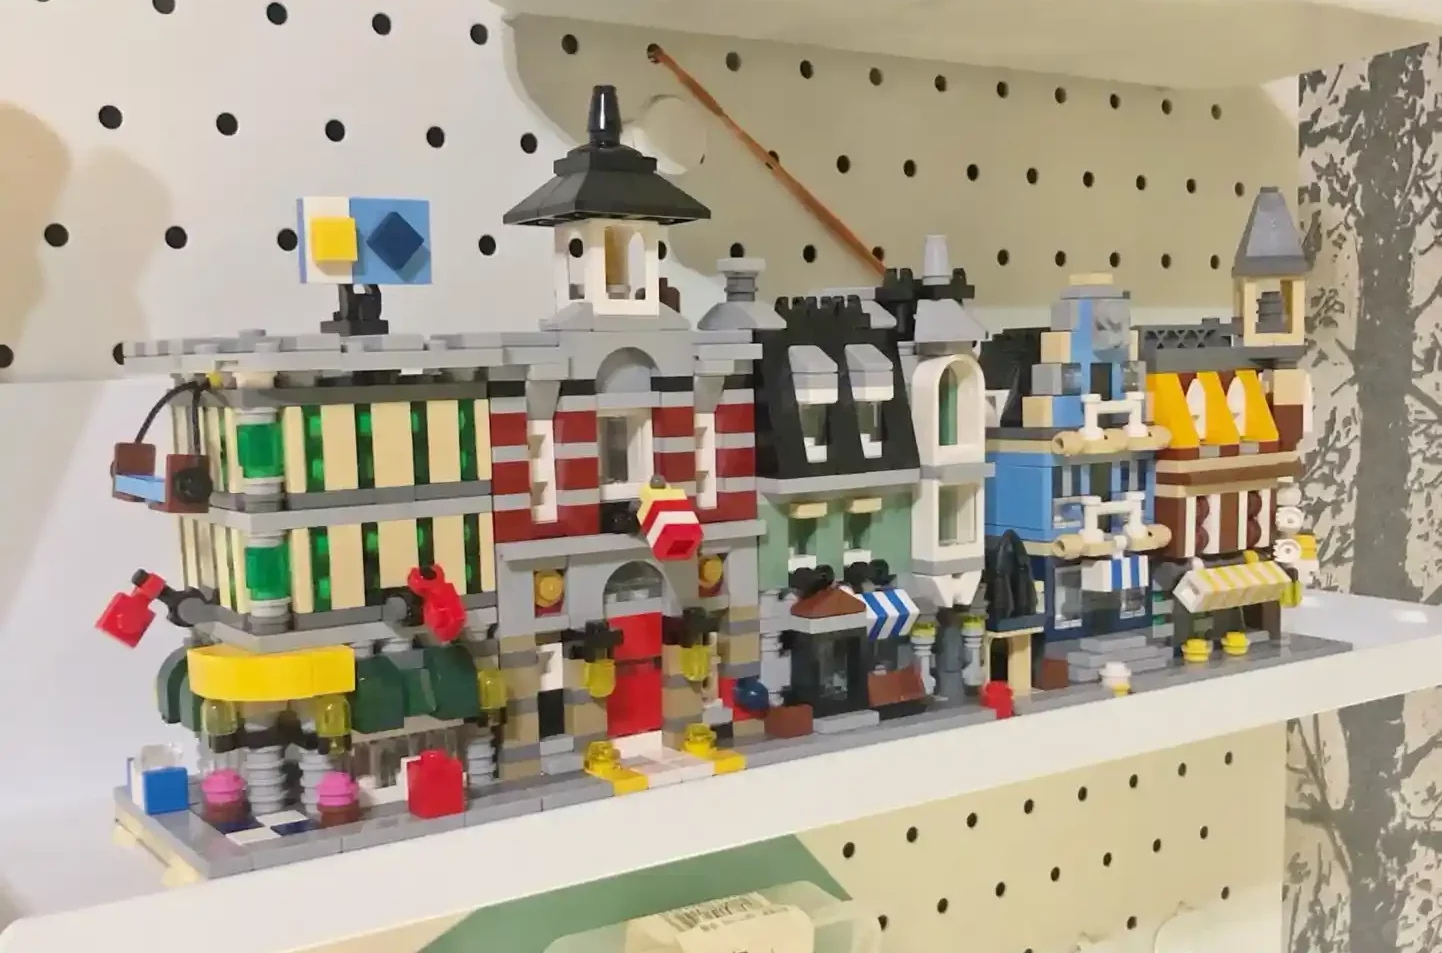 Shelf display of colorful Lego buildings with various mini Lego figures and details.